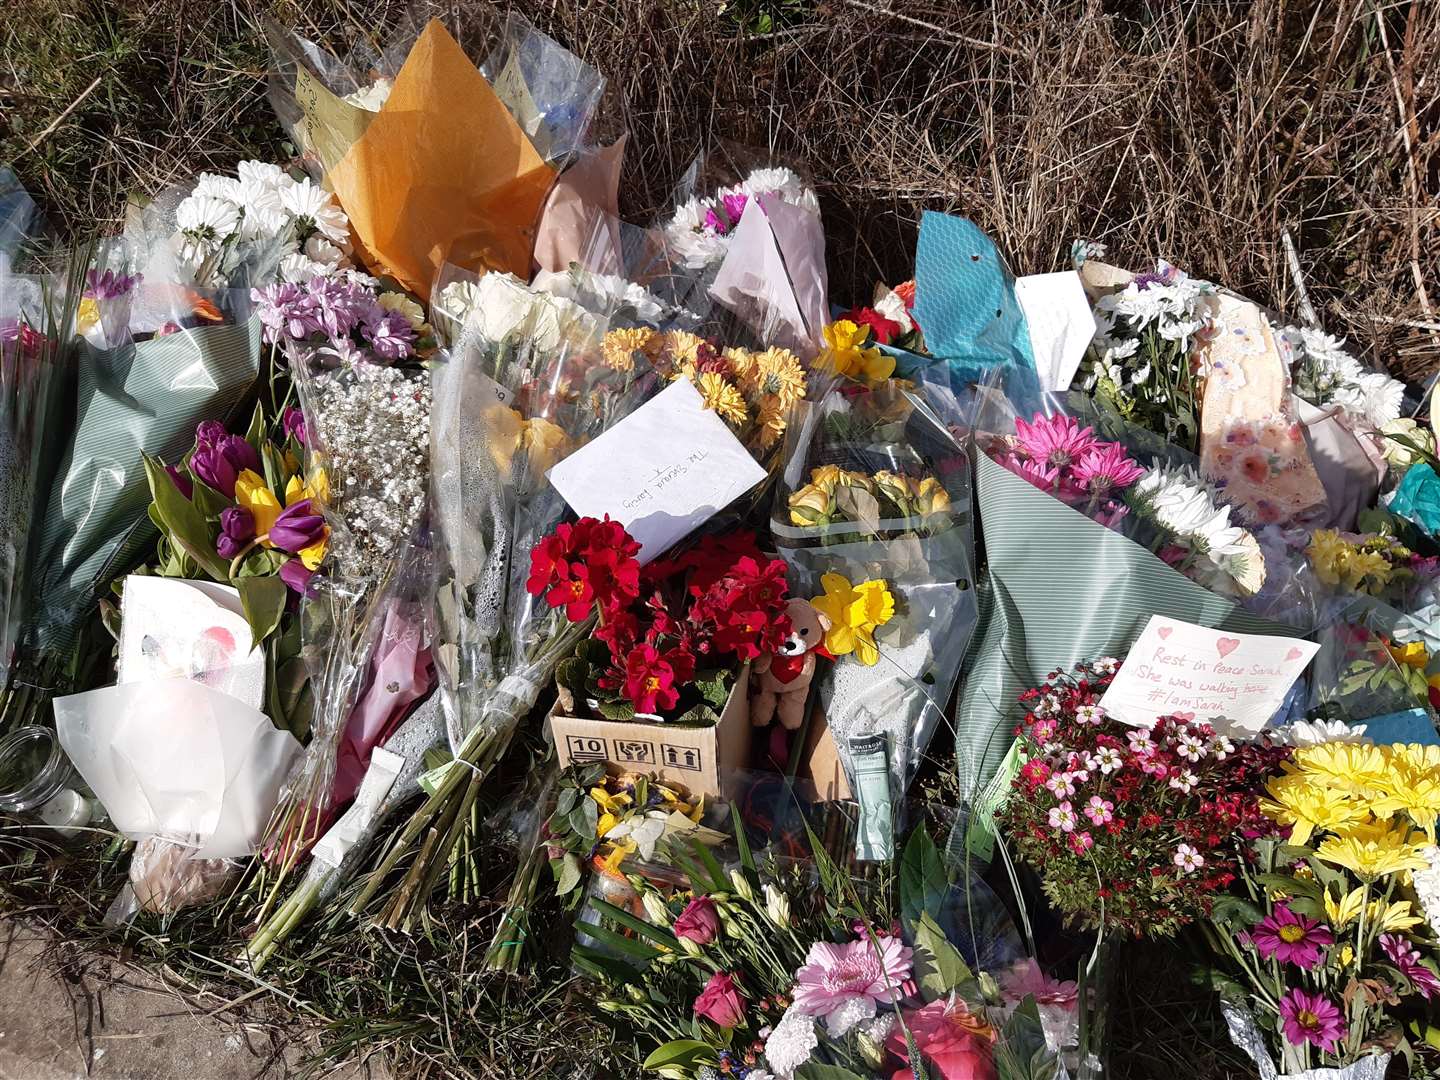 Tributes left following the discovery of the remains of Sarah Everard